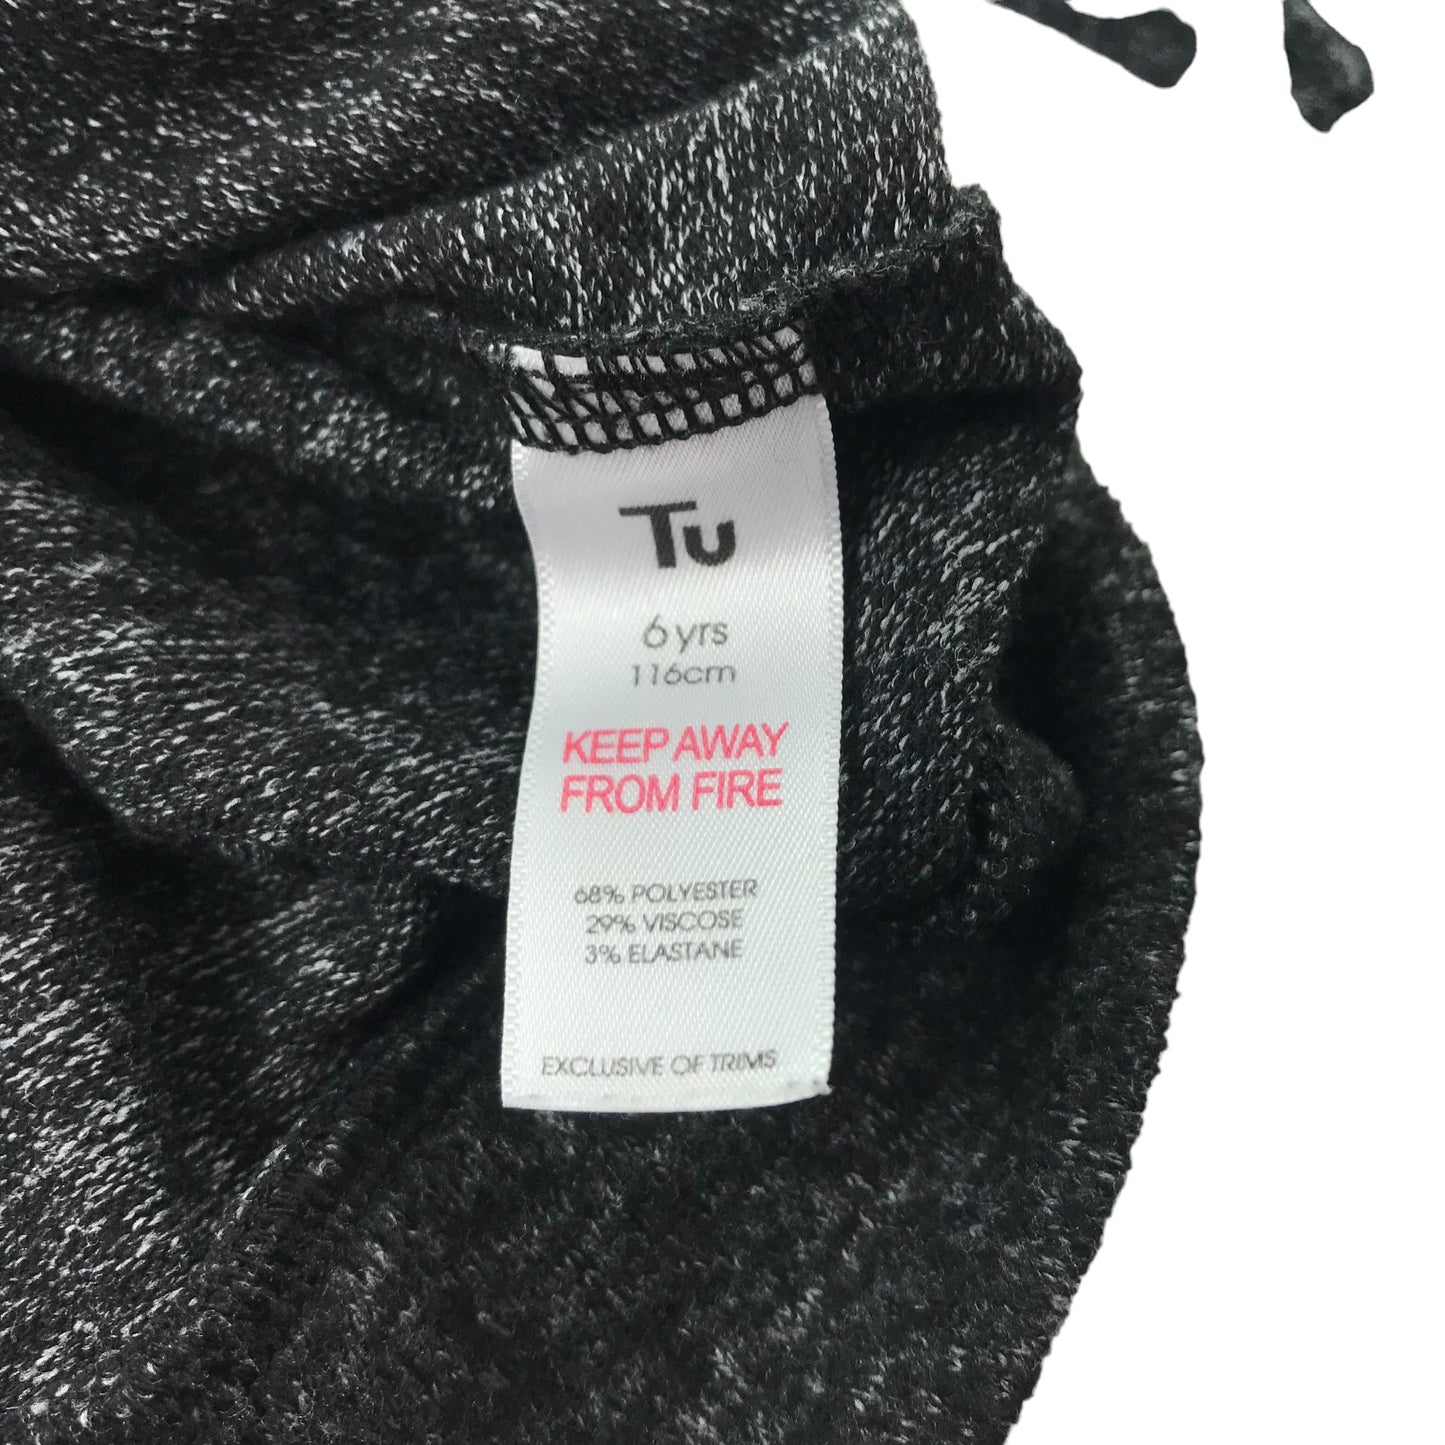 Tu Jumper Age 6 Charcoal Grey Cropped Unicorn Text Graphic